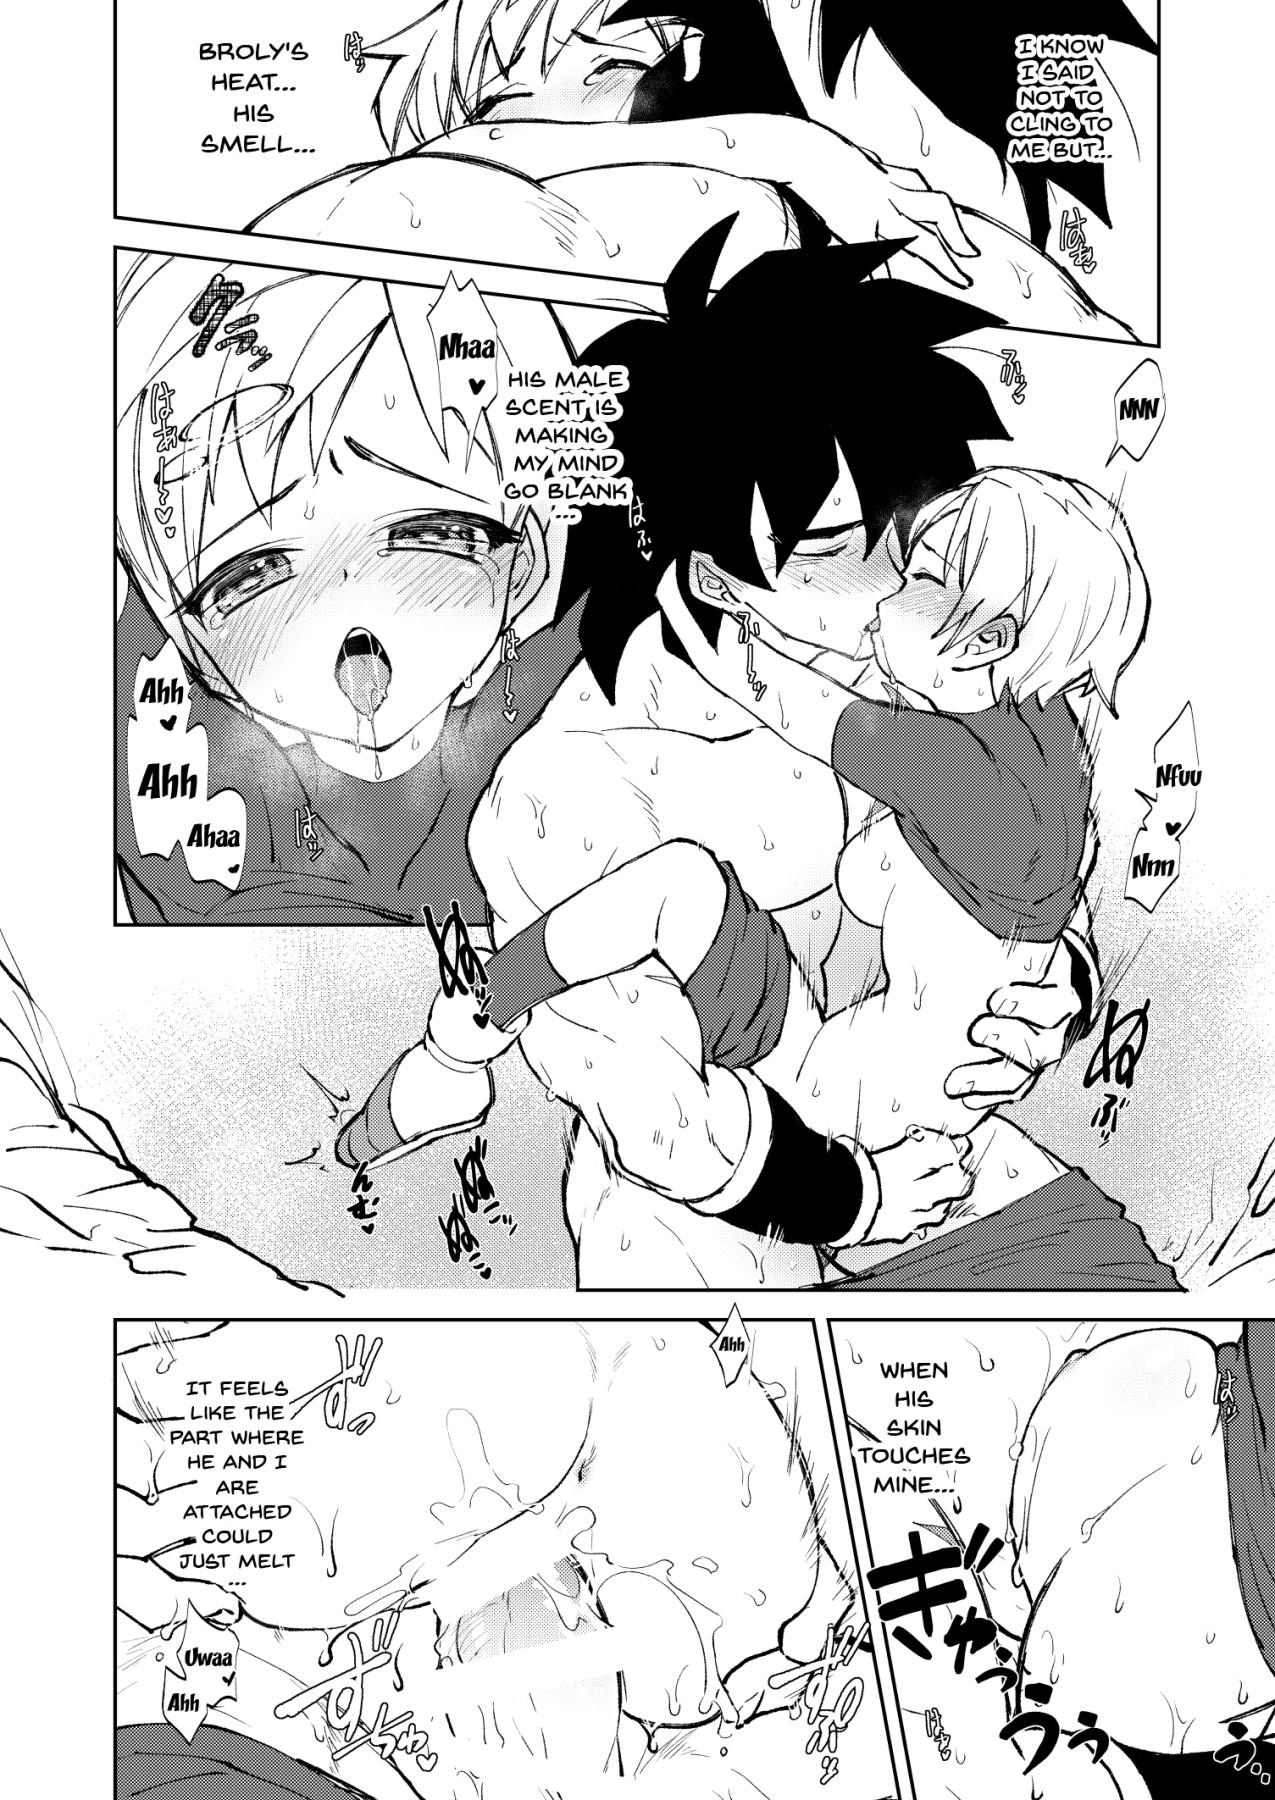 Young Men Broly x Cheelai Omake | Broly x Cheelai Extra - Dragon ball super Anal Creampie - Page 8